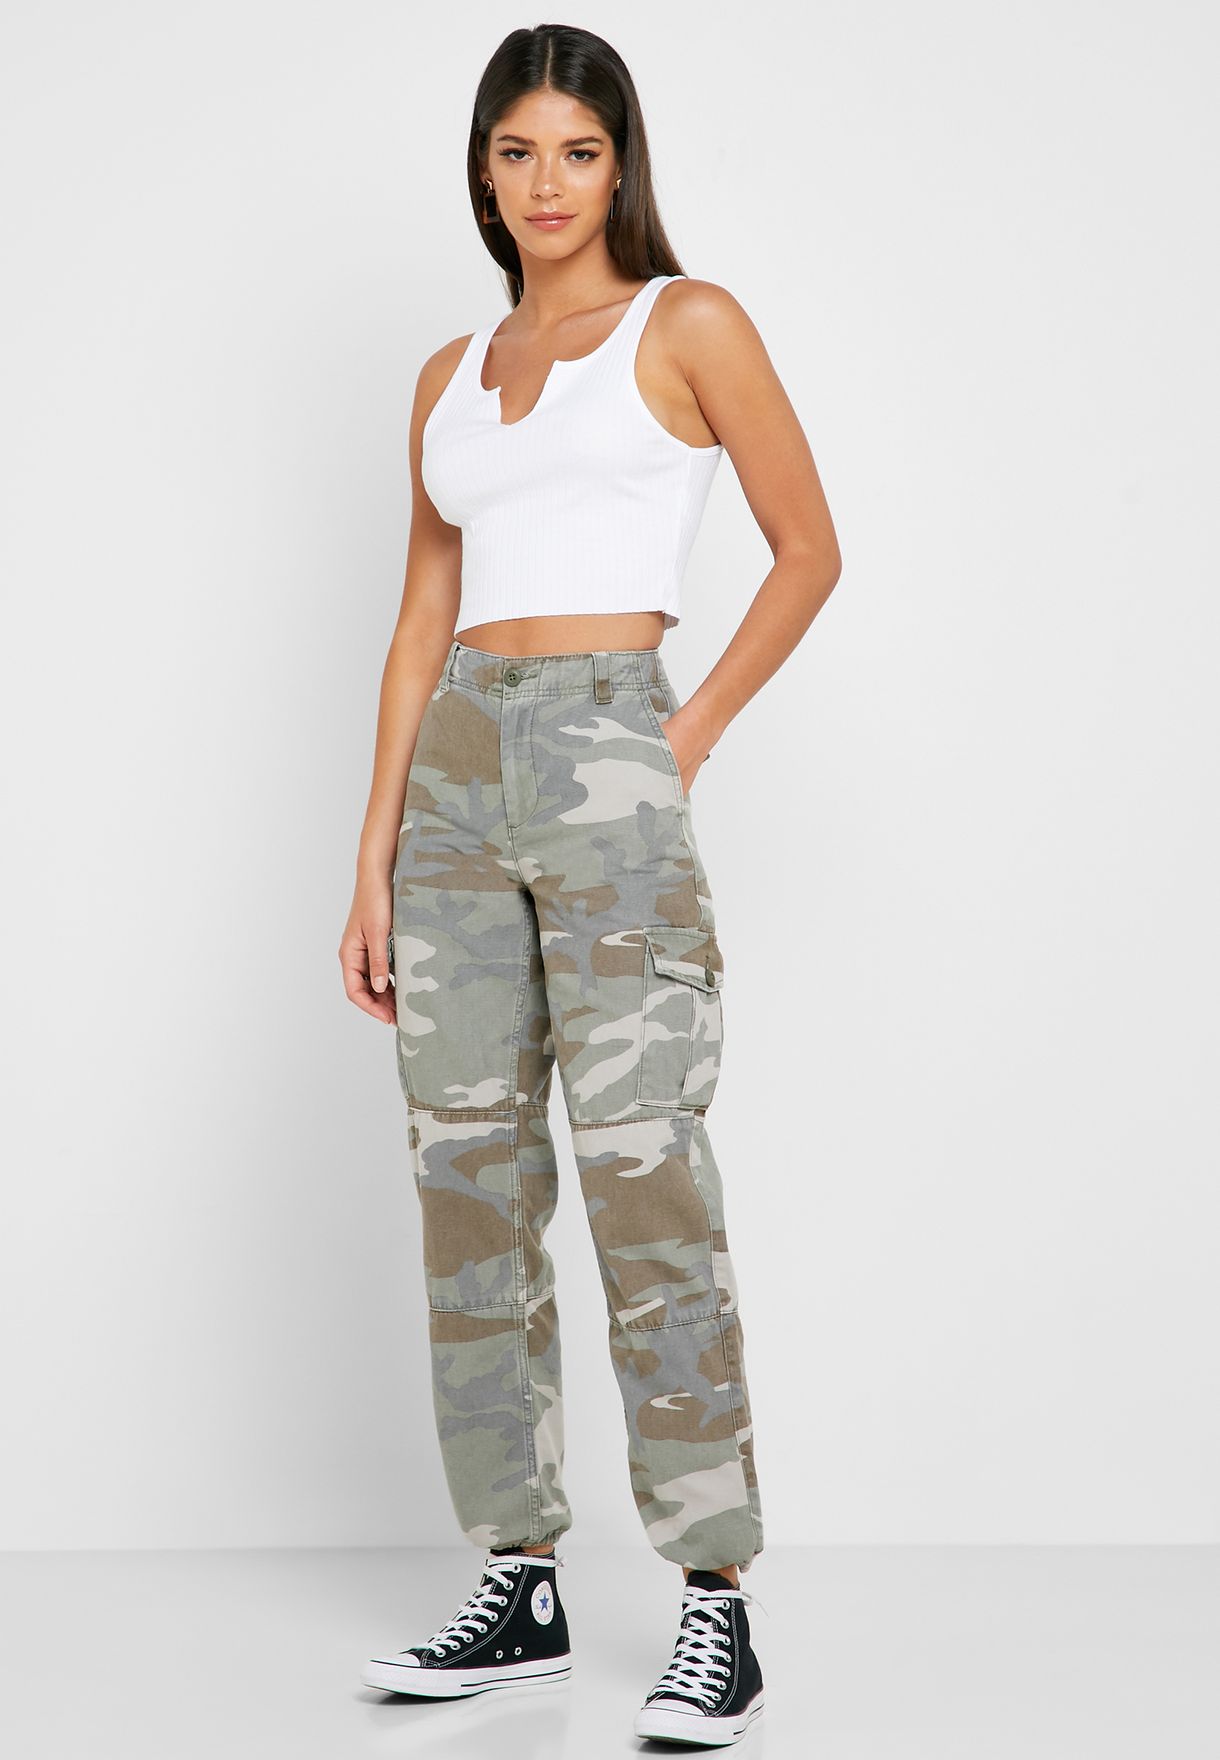 topshop camouflage jeans